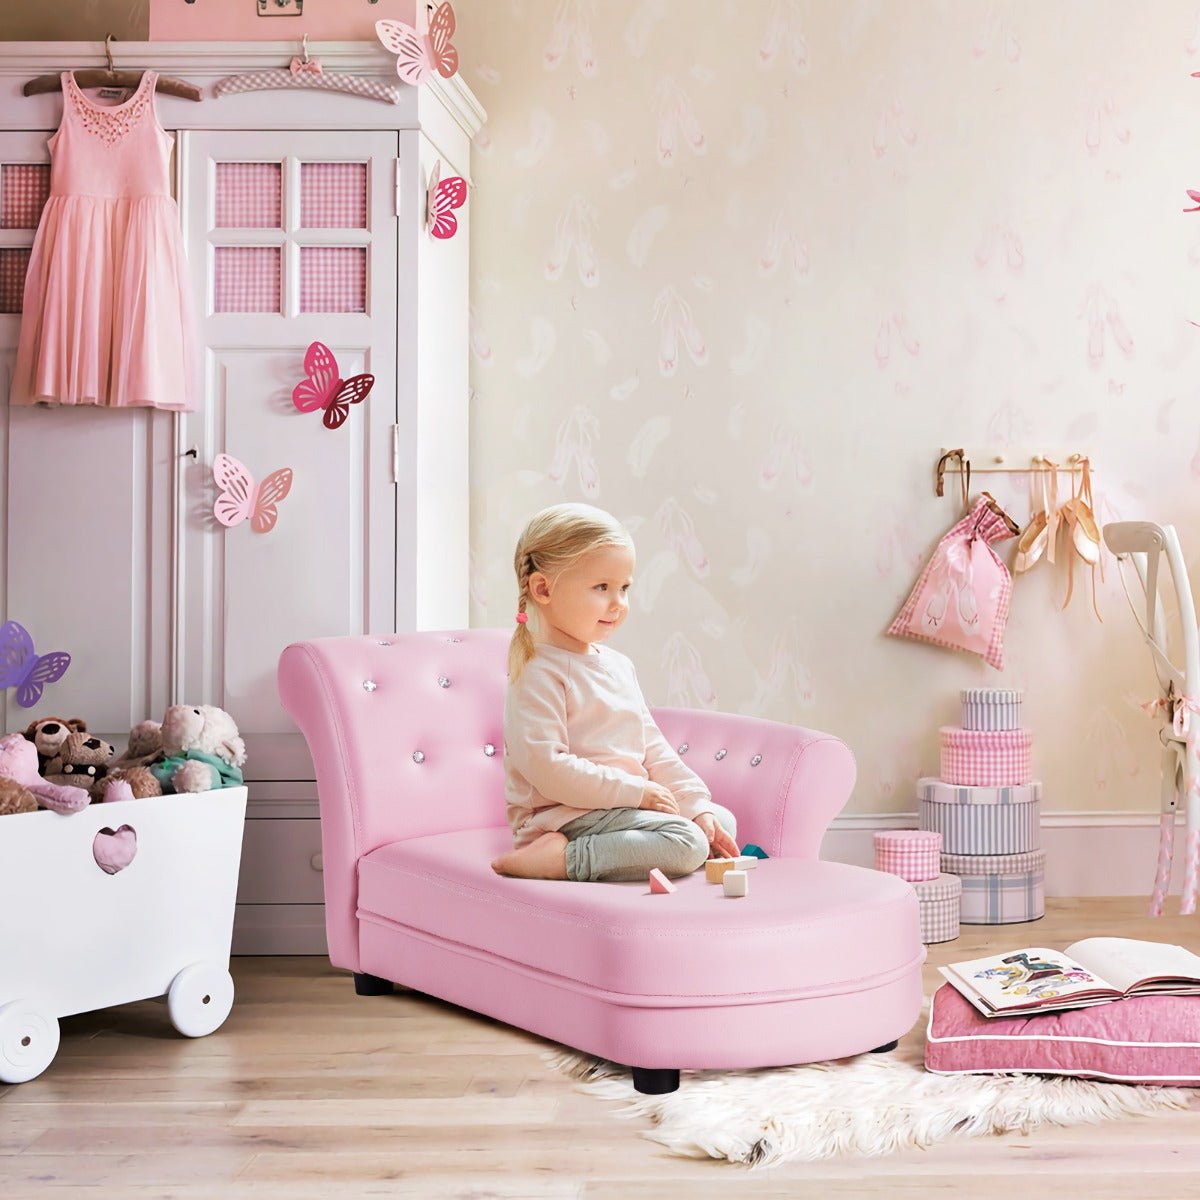 Pink Kids Sofa: PVC Leather and Embedded Crystals - Luxurious Comfort